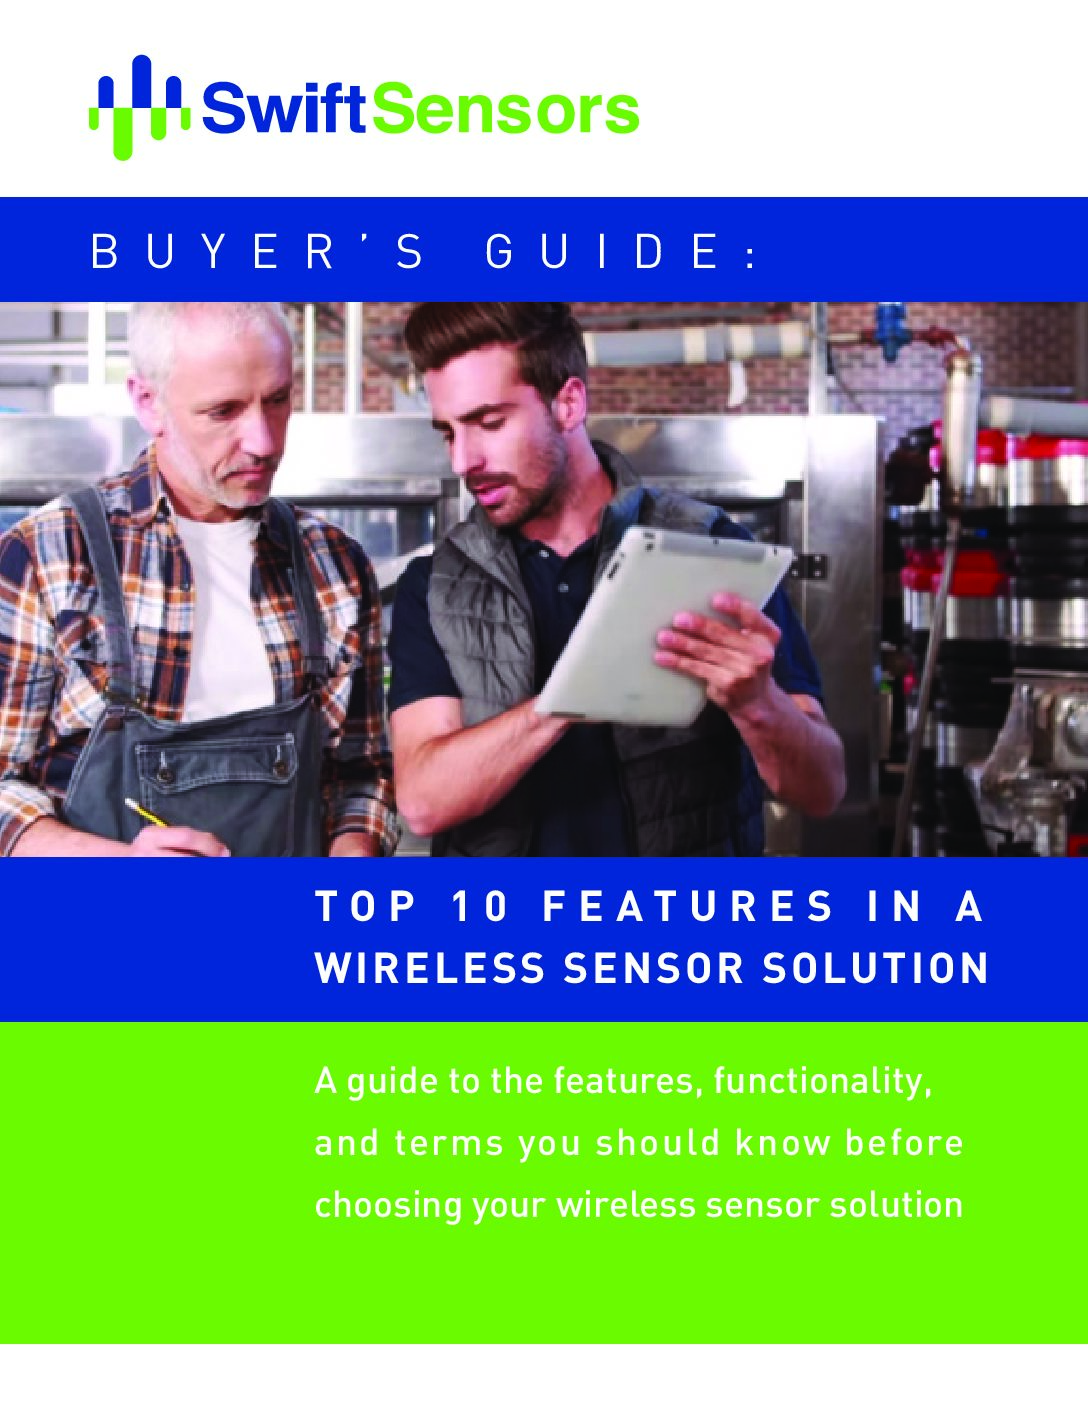 Swift-Sensors-Buyers-Guide-Top-10-Reasons-to-Implement-a-Wireless-Sensor-System